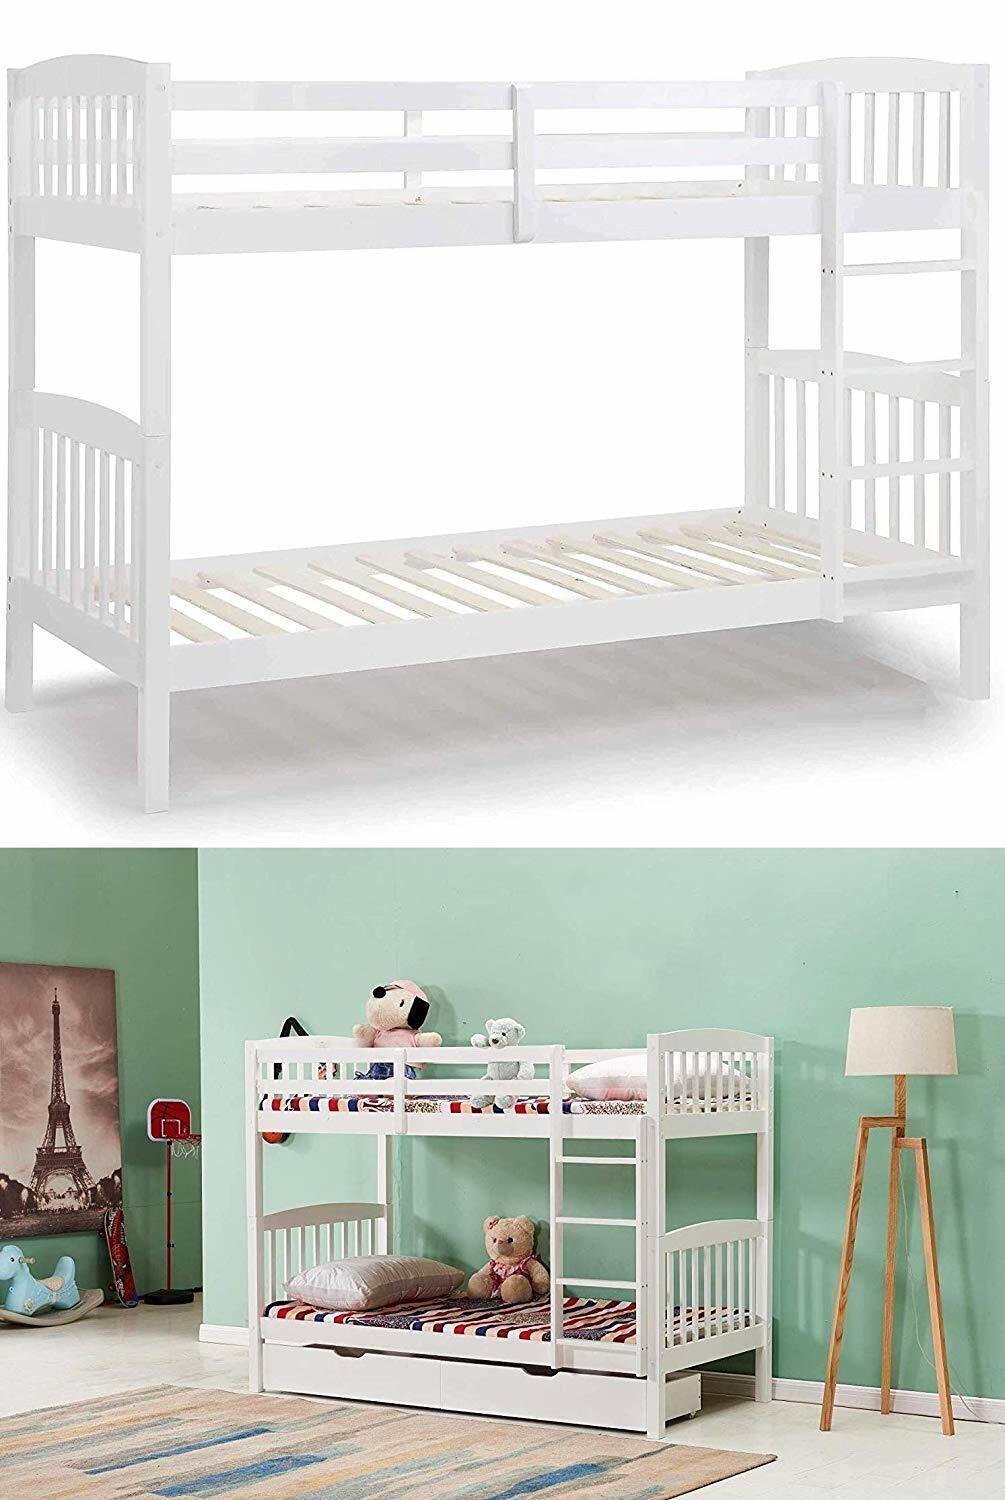 Wood Bunk Bed Comes With 2 Spring Mattresses For Kids Children Adults